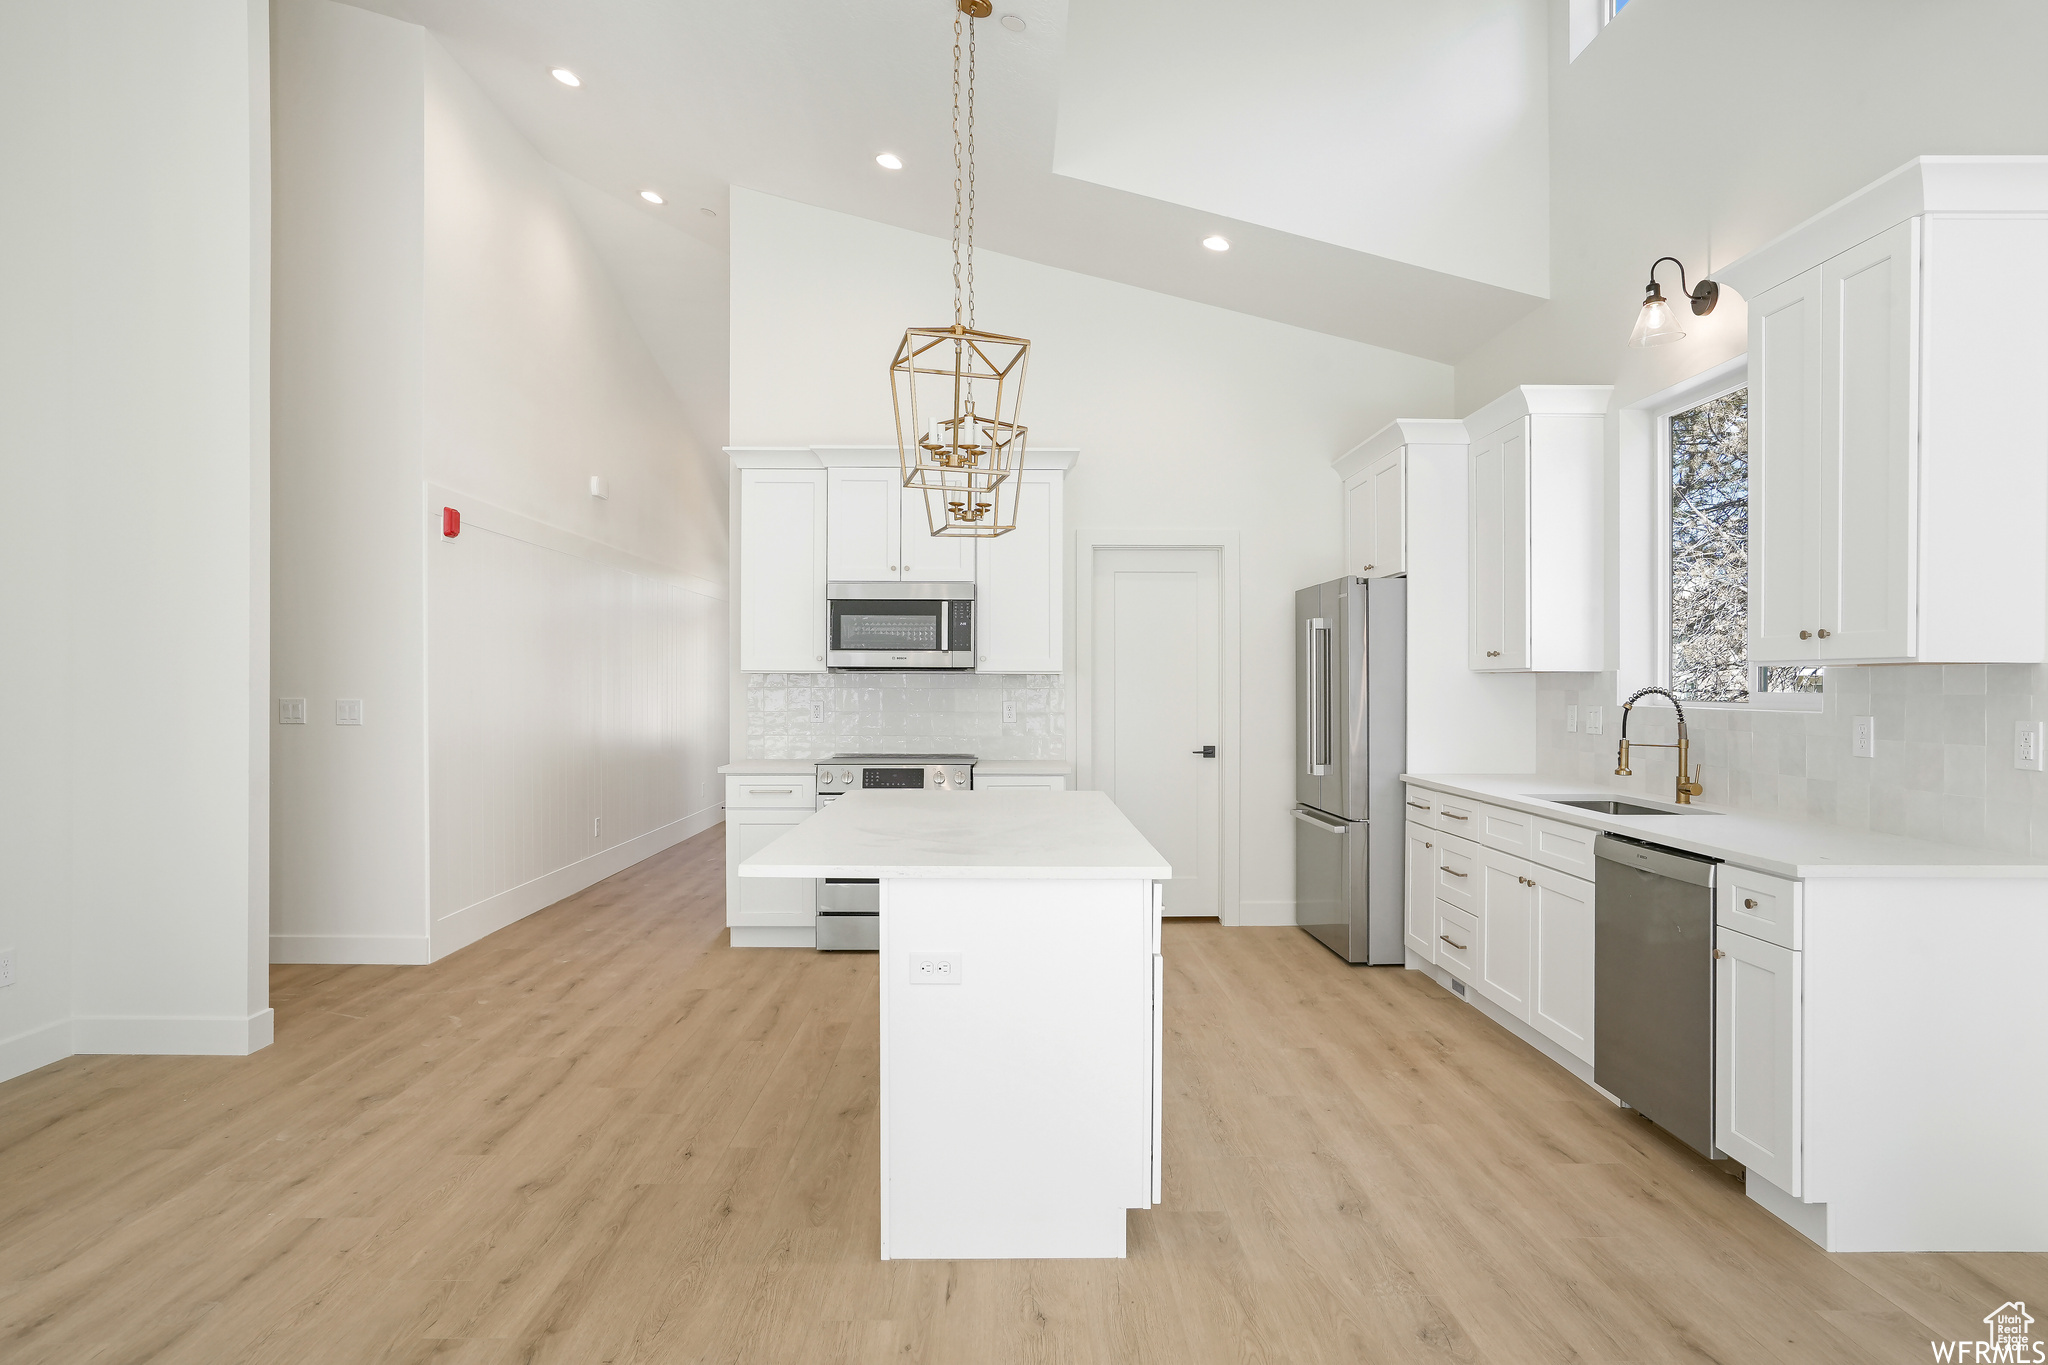 Kitchen featuring appliances with stainless steel finishes, high vaulted ceiling, light wood-type flooring, a center island, and tasteful backsplash